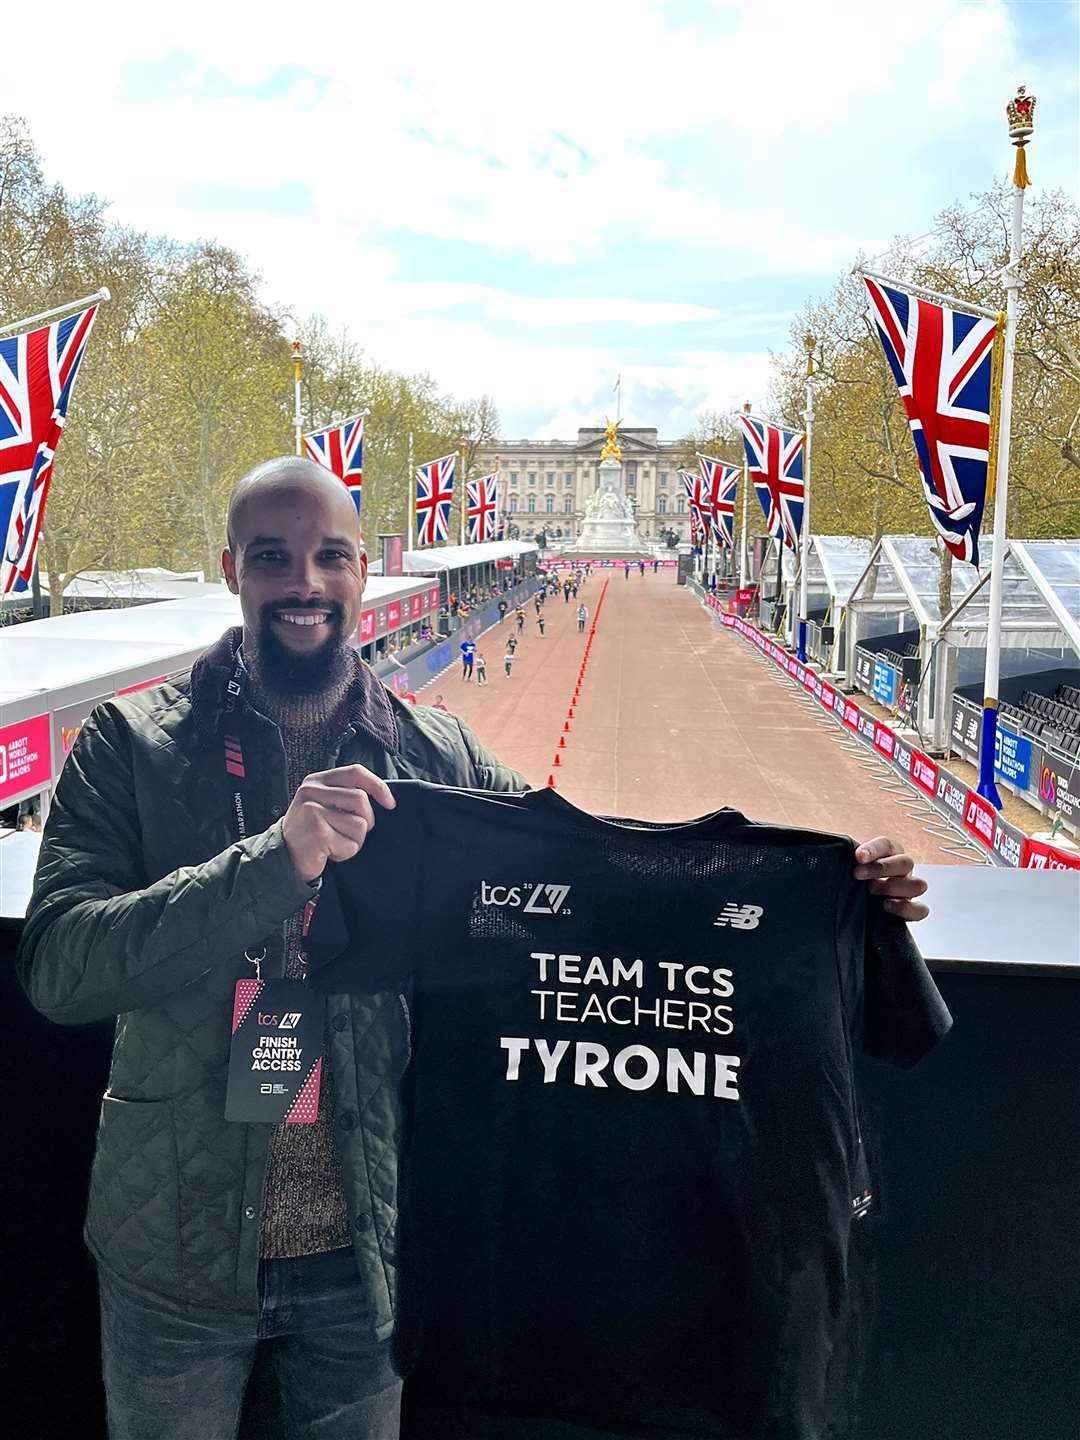 Tyrone West will be running his second TCS London Marathon as part of Team TCS Teachers (Handout/PA)